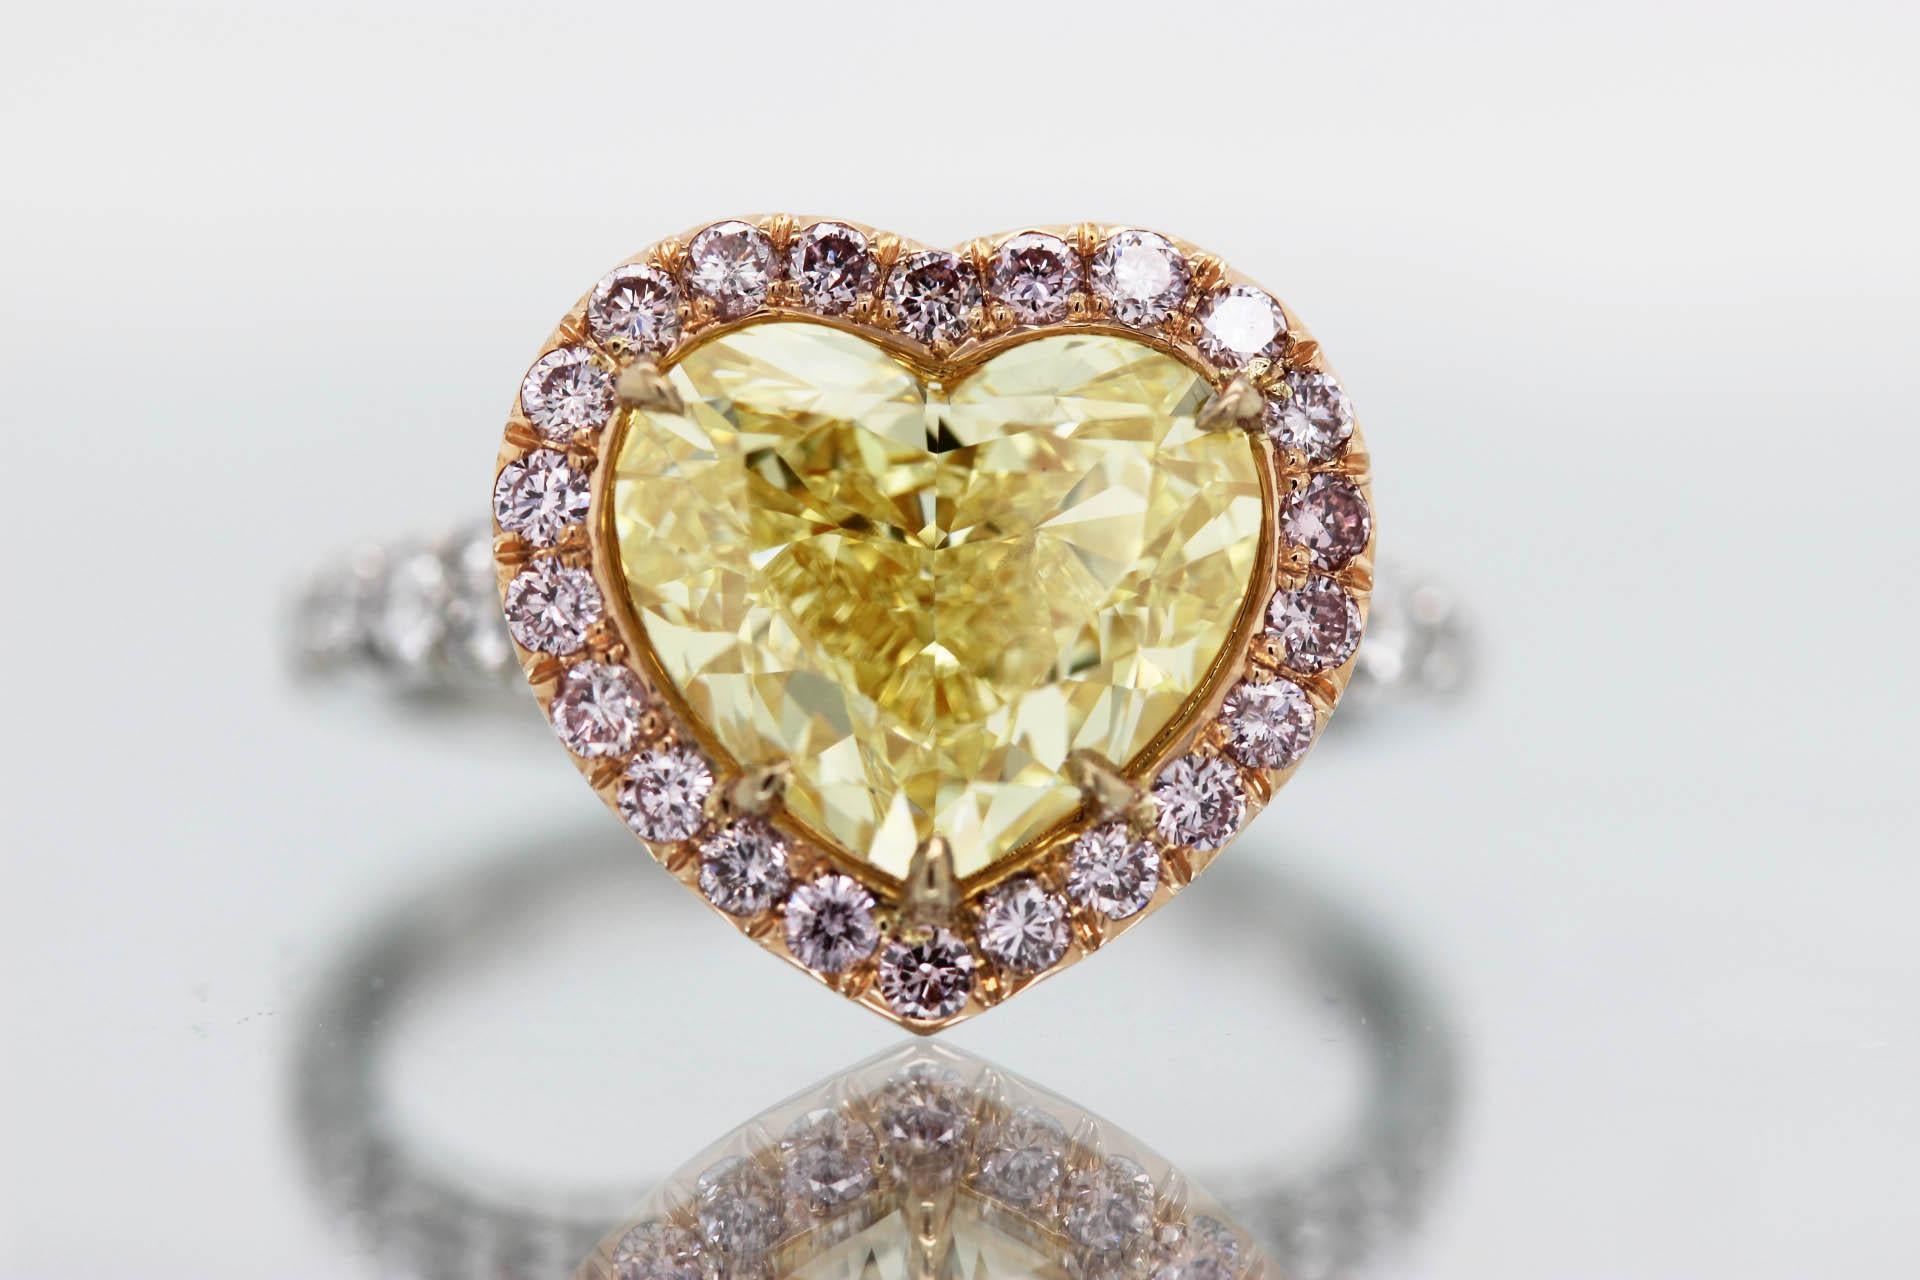 Women's 4.51 Carat Fancy Yellow Heart-Shaped Diamond Engagement Ring VVS2 GIA Scarselli For Sale